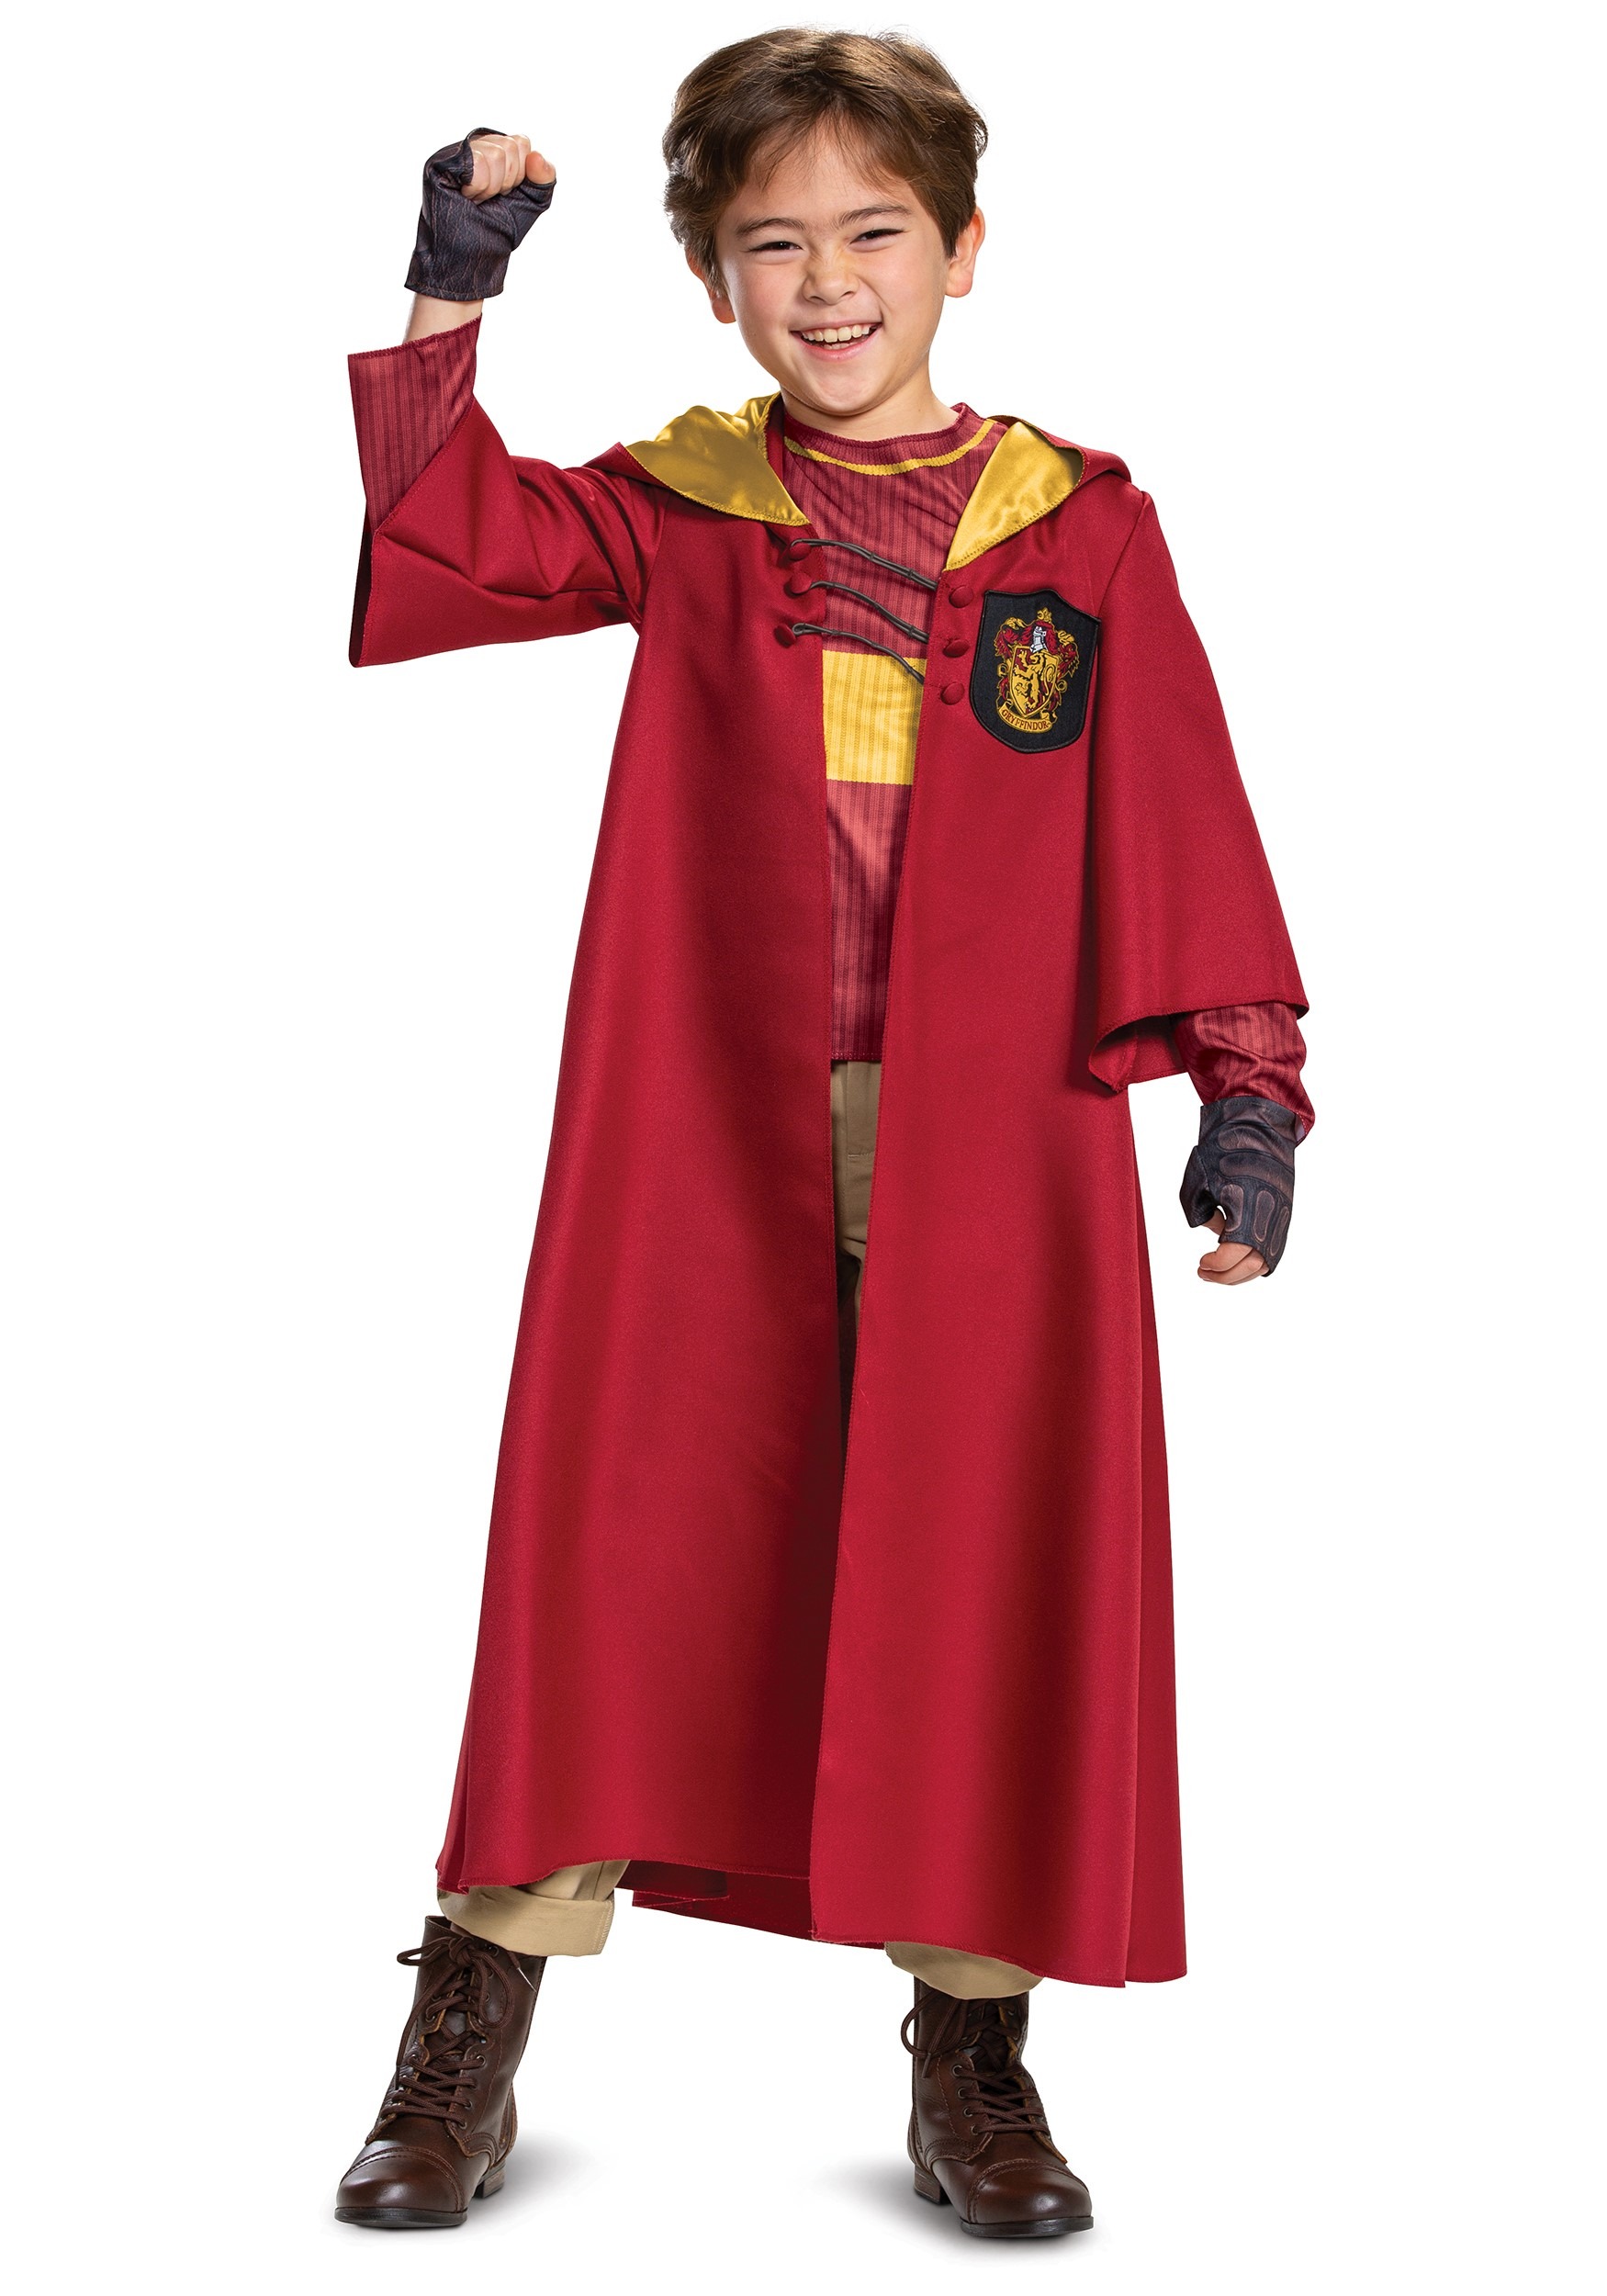 Harry Potter Deluxe Gryffindor Quidditch Robe Costume For Kids